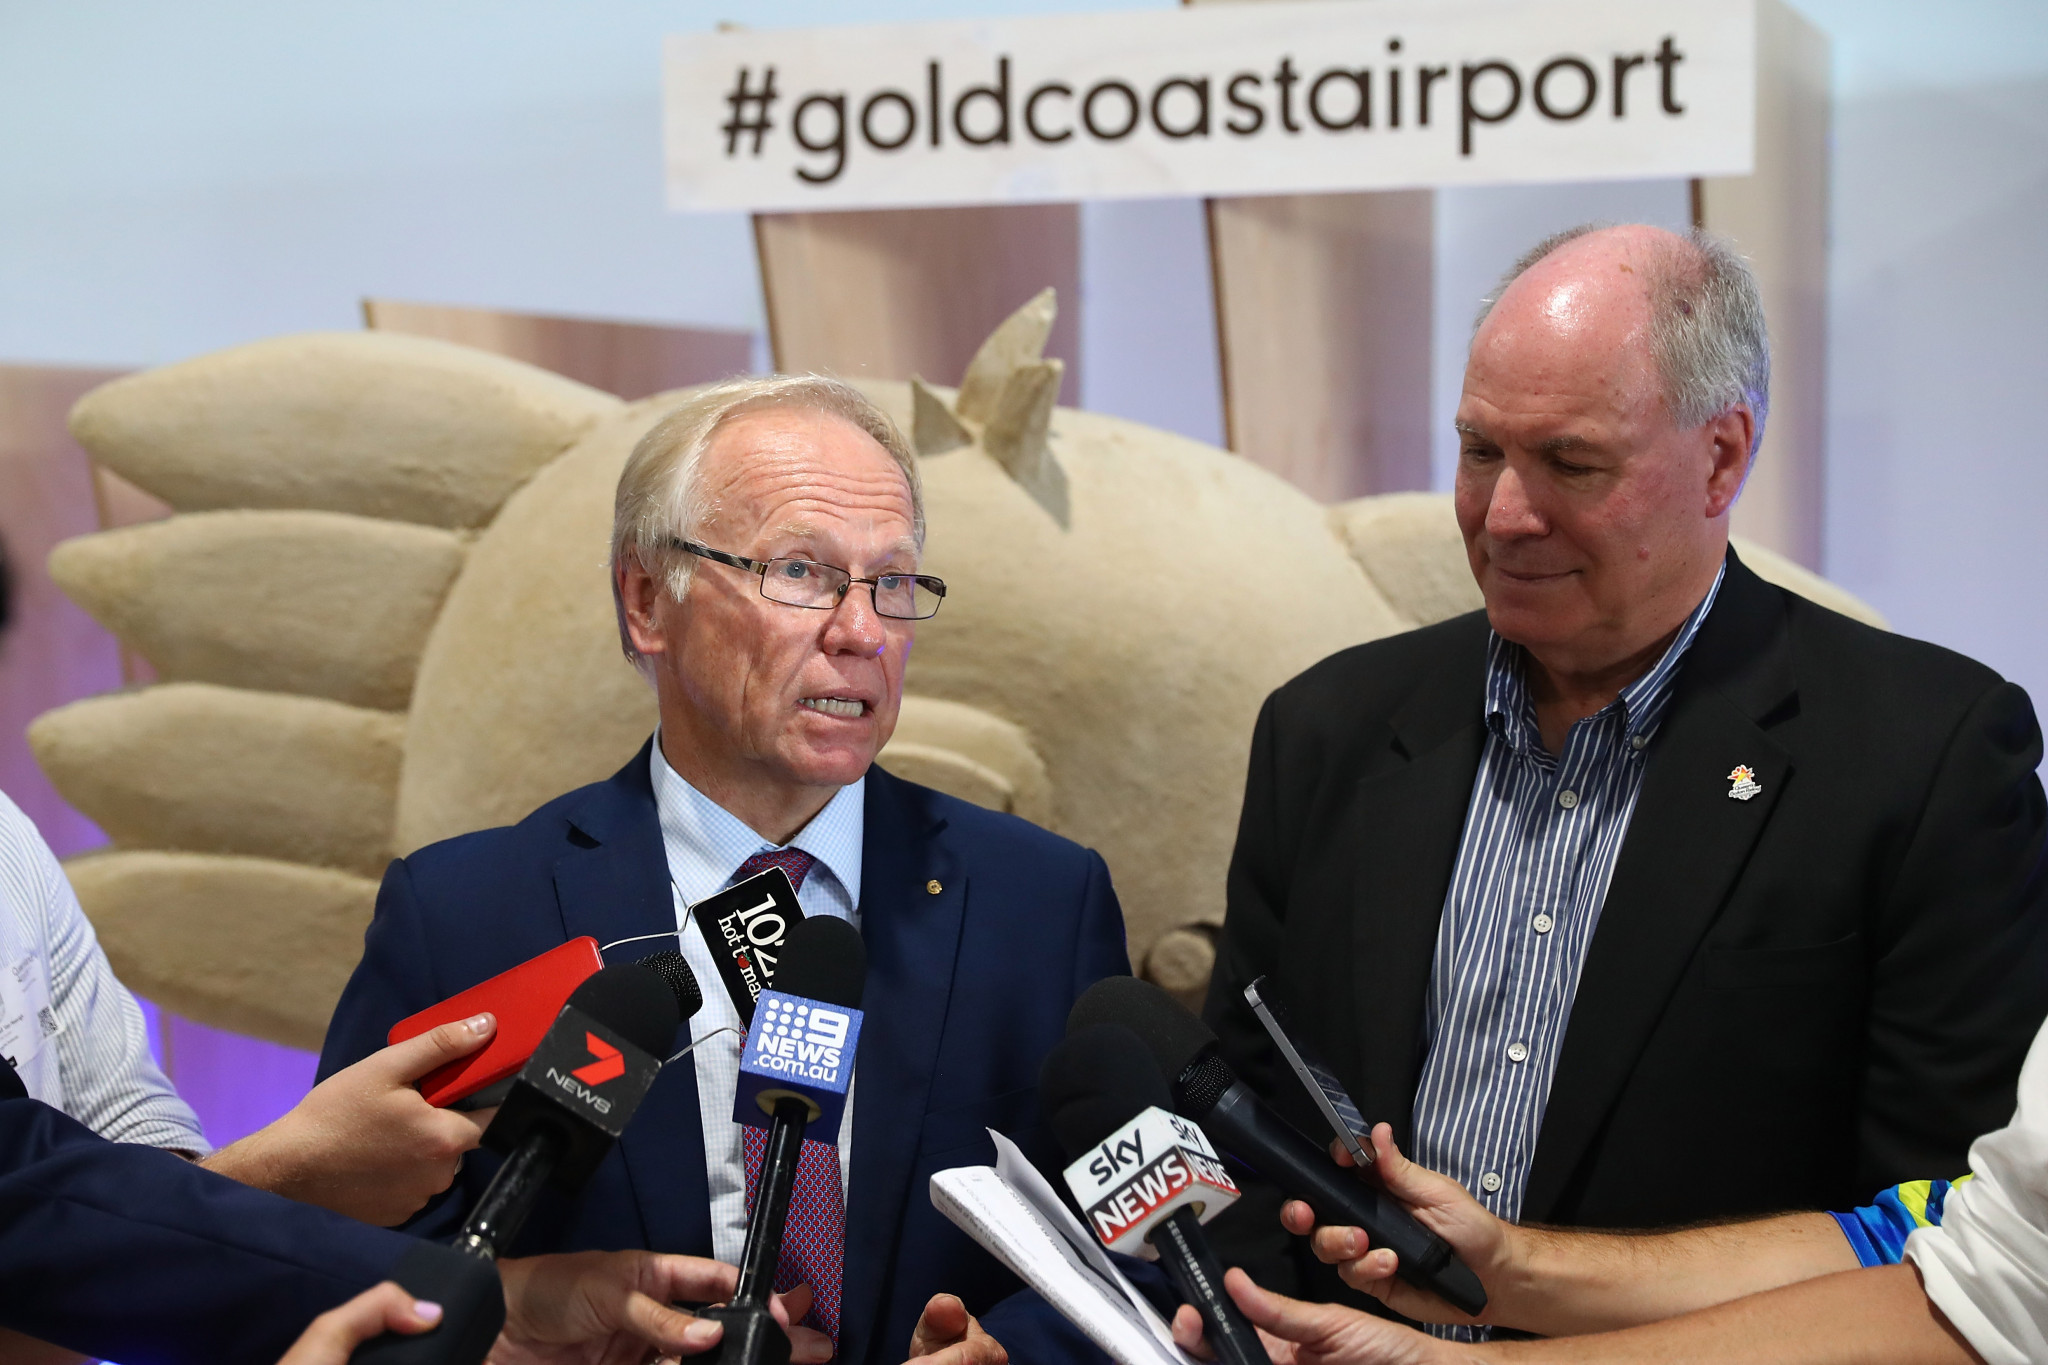 Gold Coast 2018 chairman Peter Beattie has urged people to use public transport during the Commonwealth Games ©Getty Images